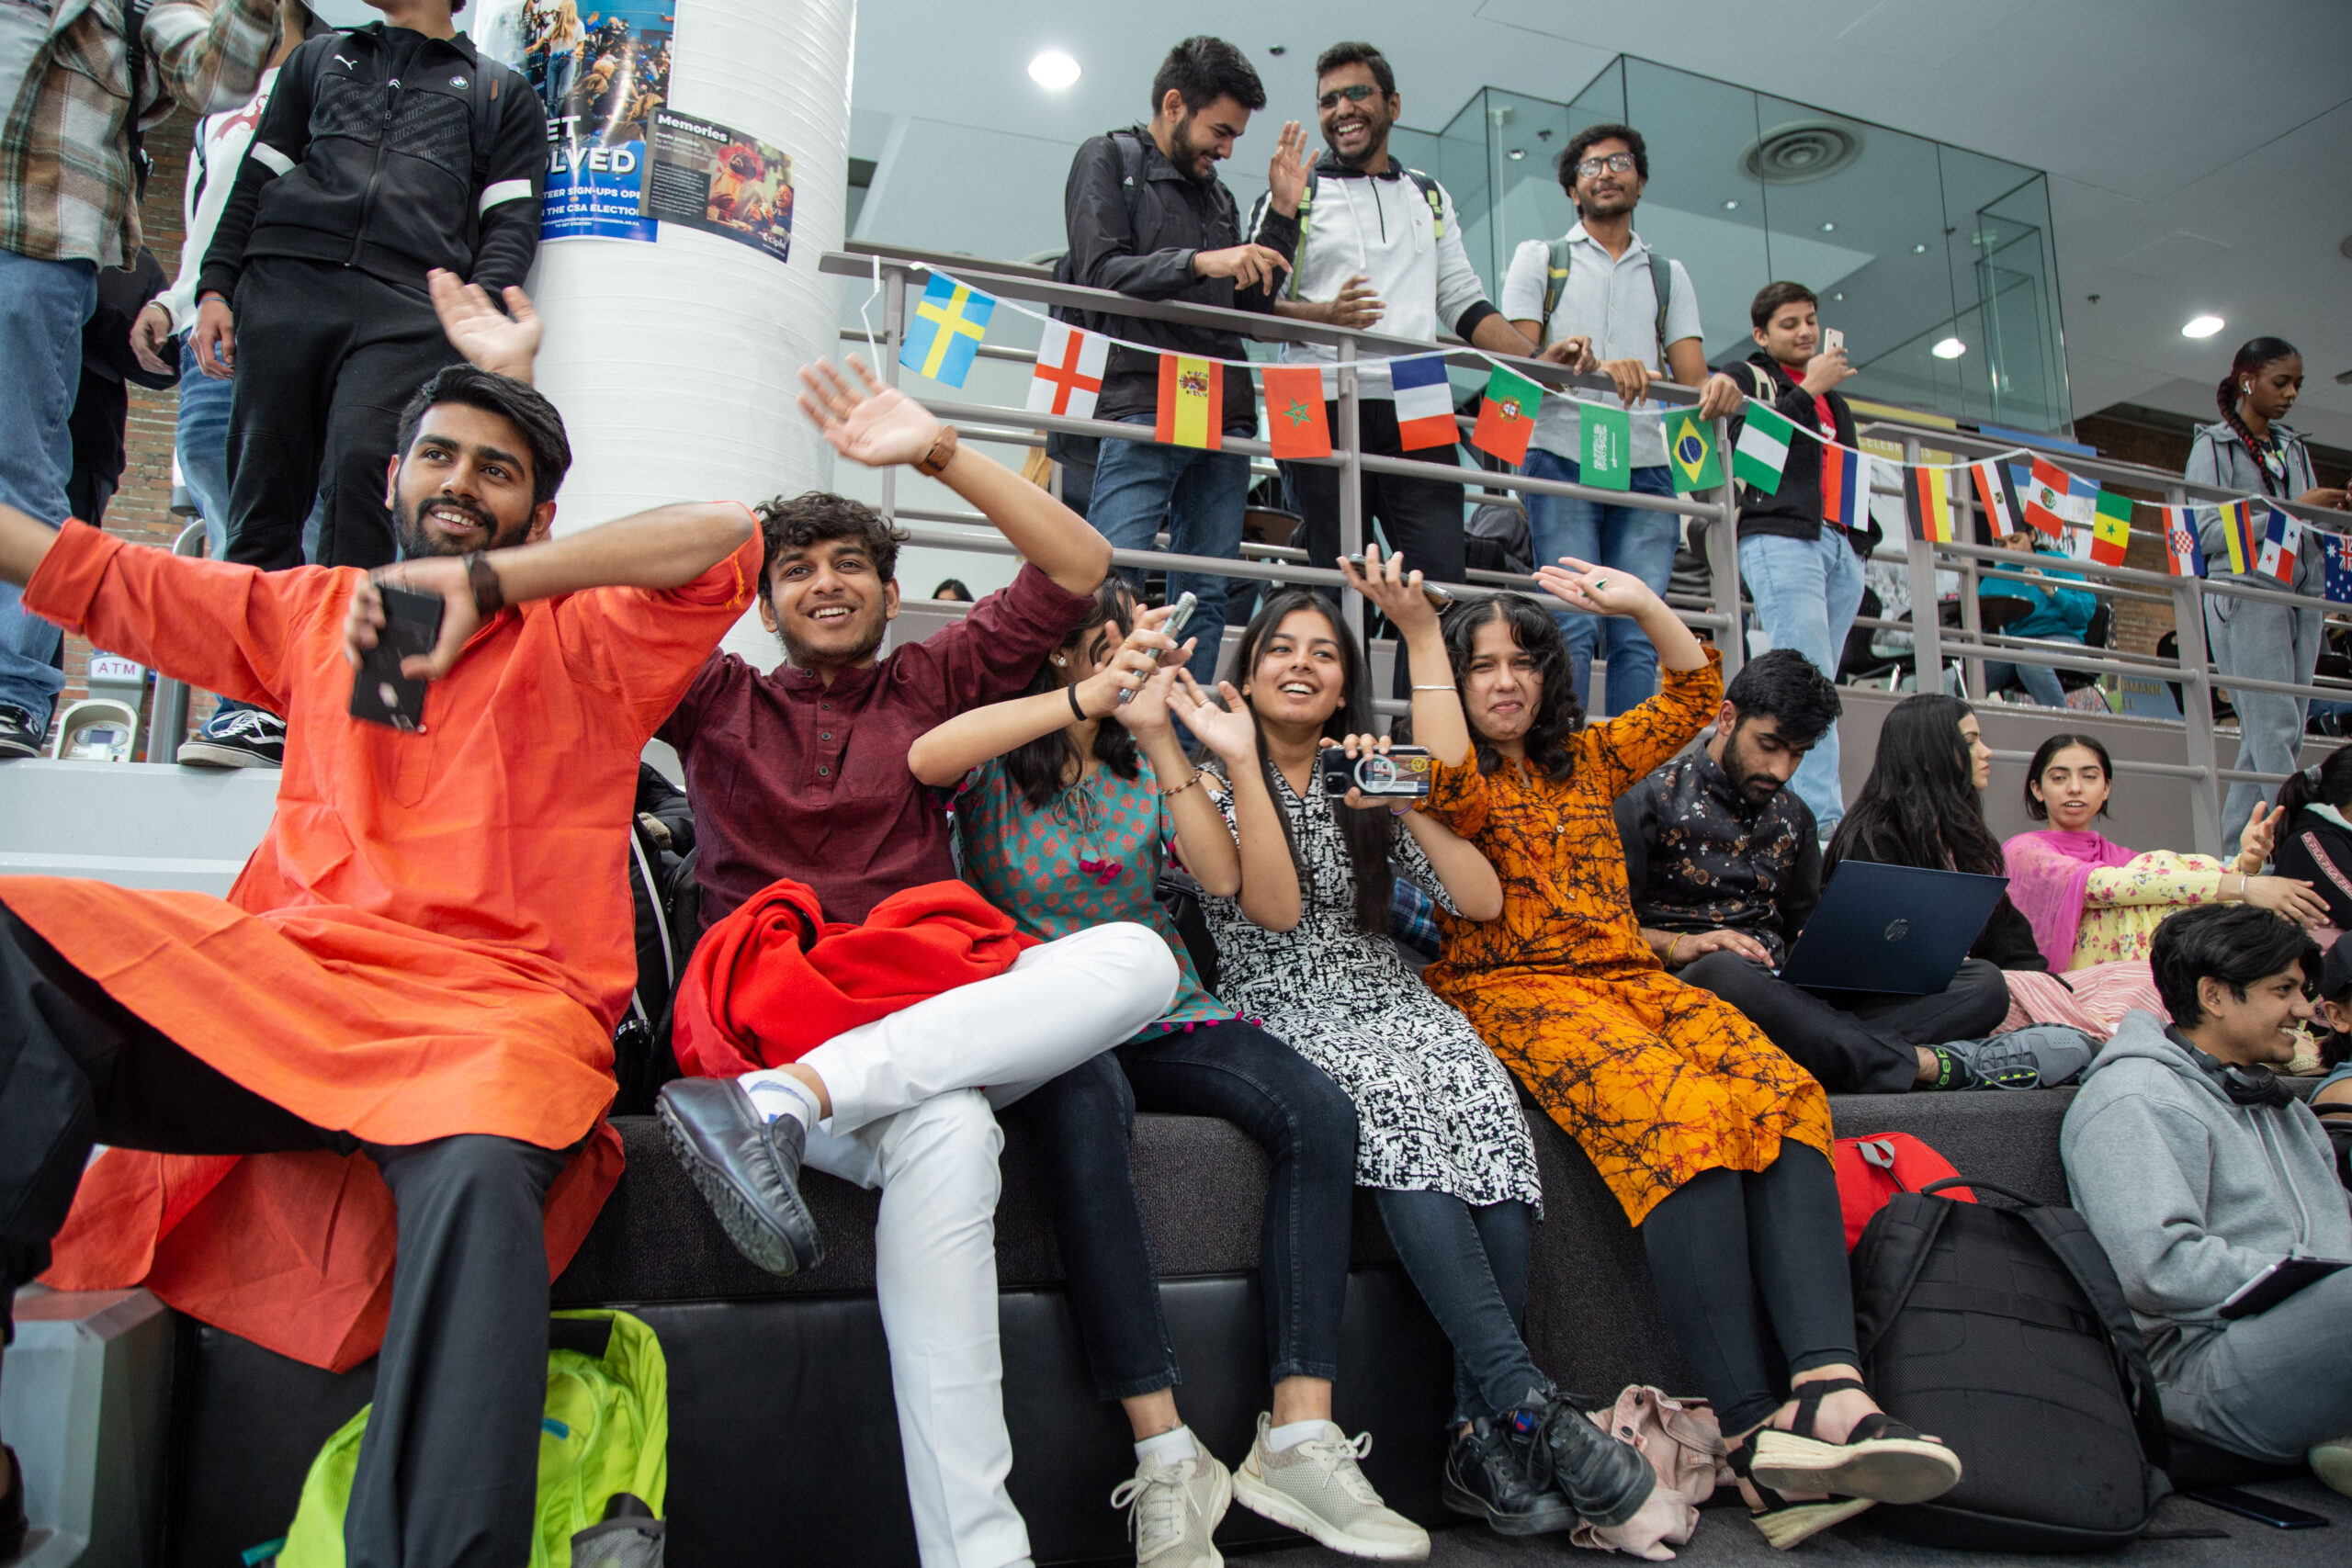 A group of international students celebrate in Tegler Student Centre.